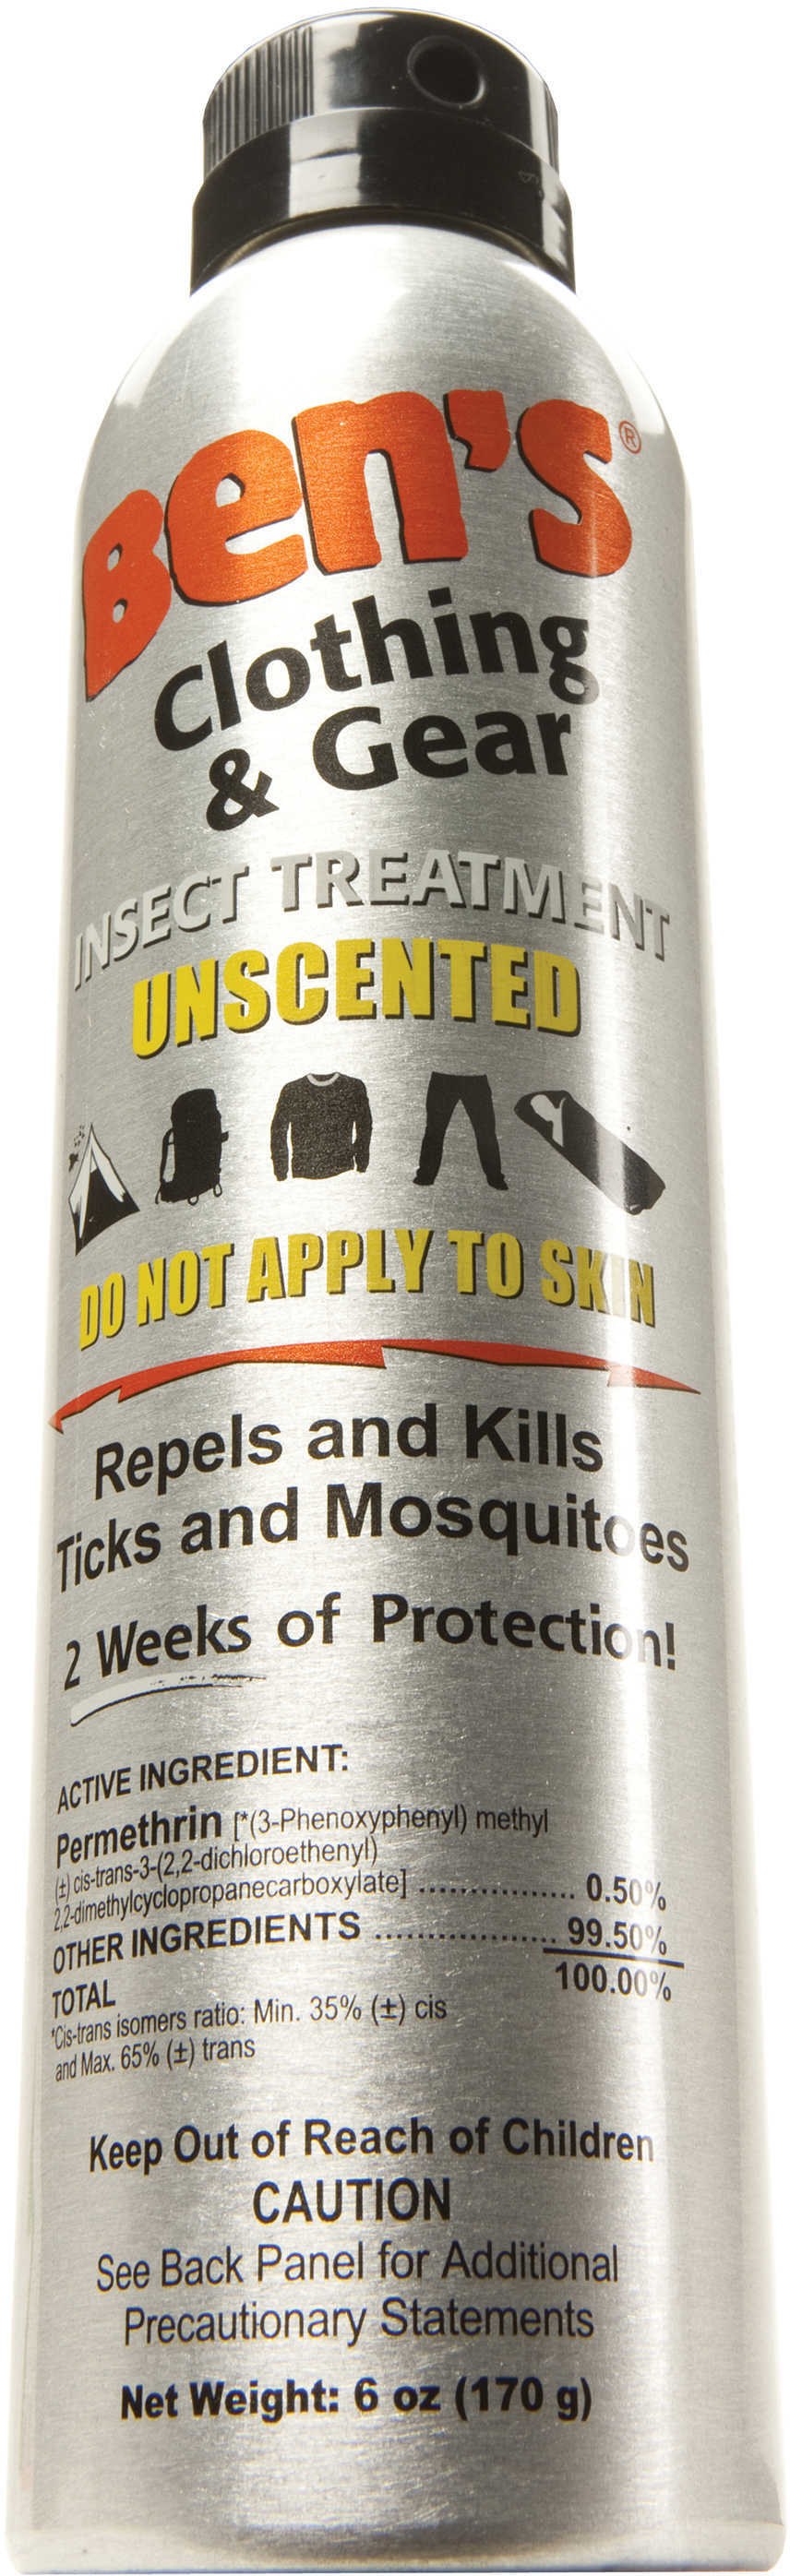 Ben's Clothing & Gear 6Oz Continuous Spray Insect Repellent